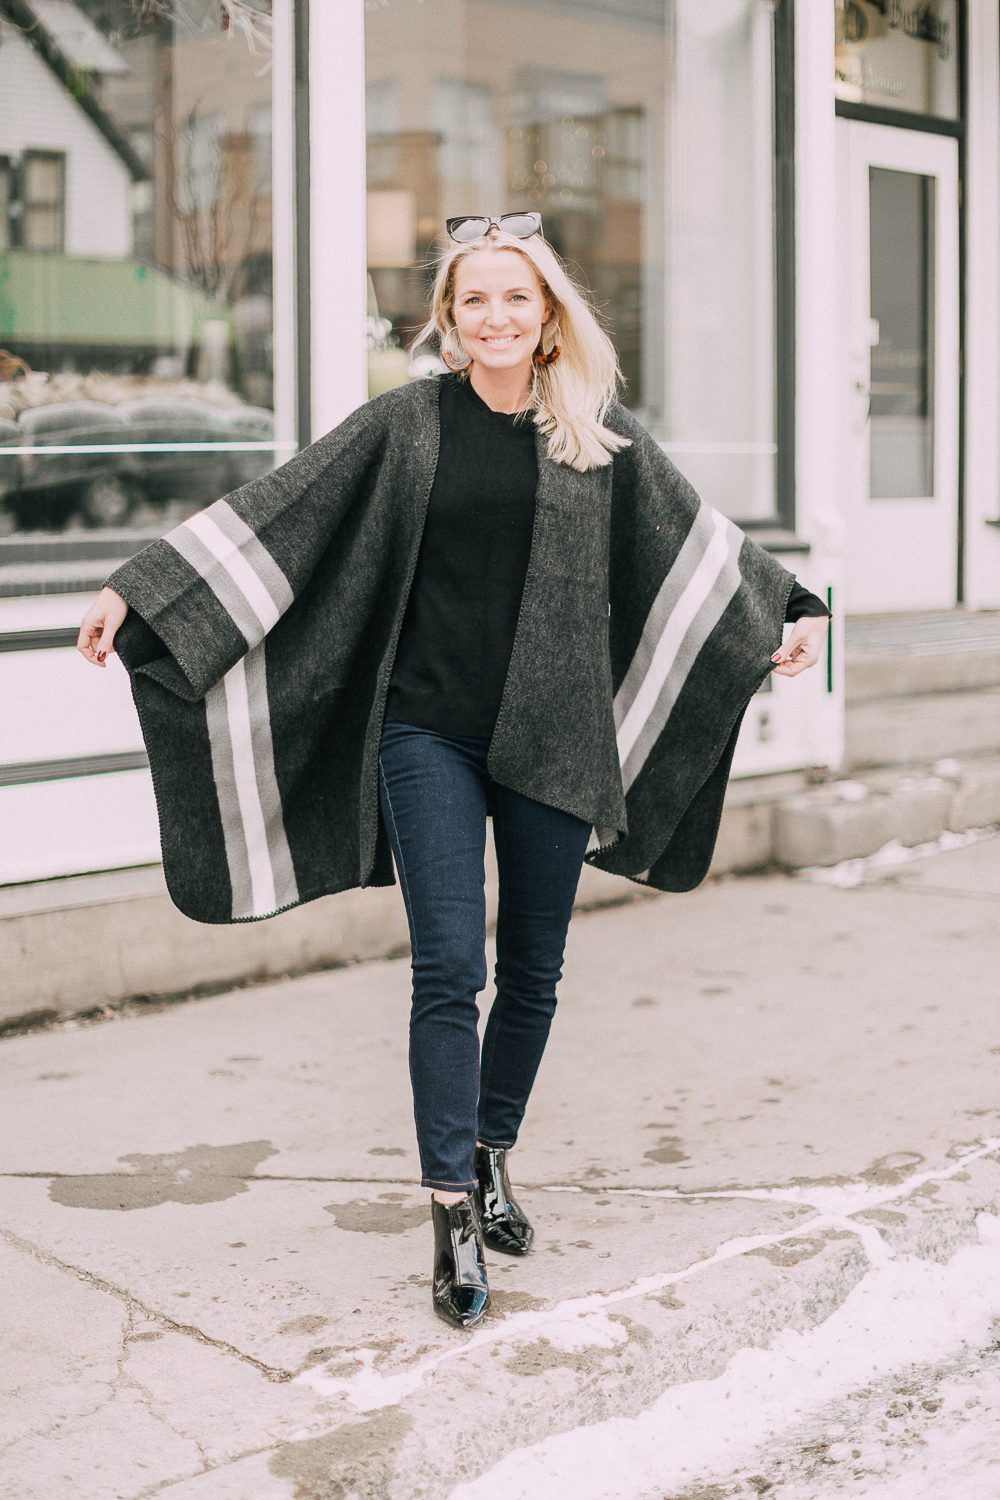 wardrobe staples your closet needs including a black cashmere crewneck sweater and high rise dark wash skinny jeans both from Walmart paired with a poncho and patent booties